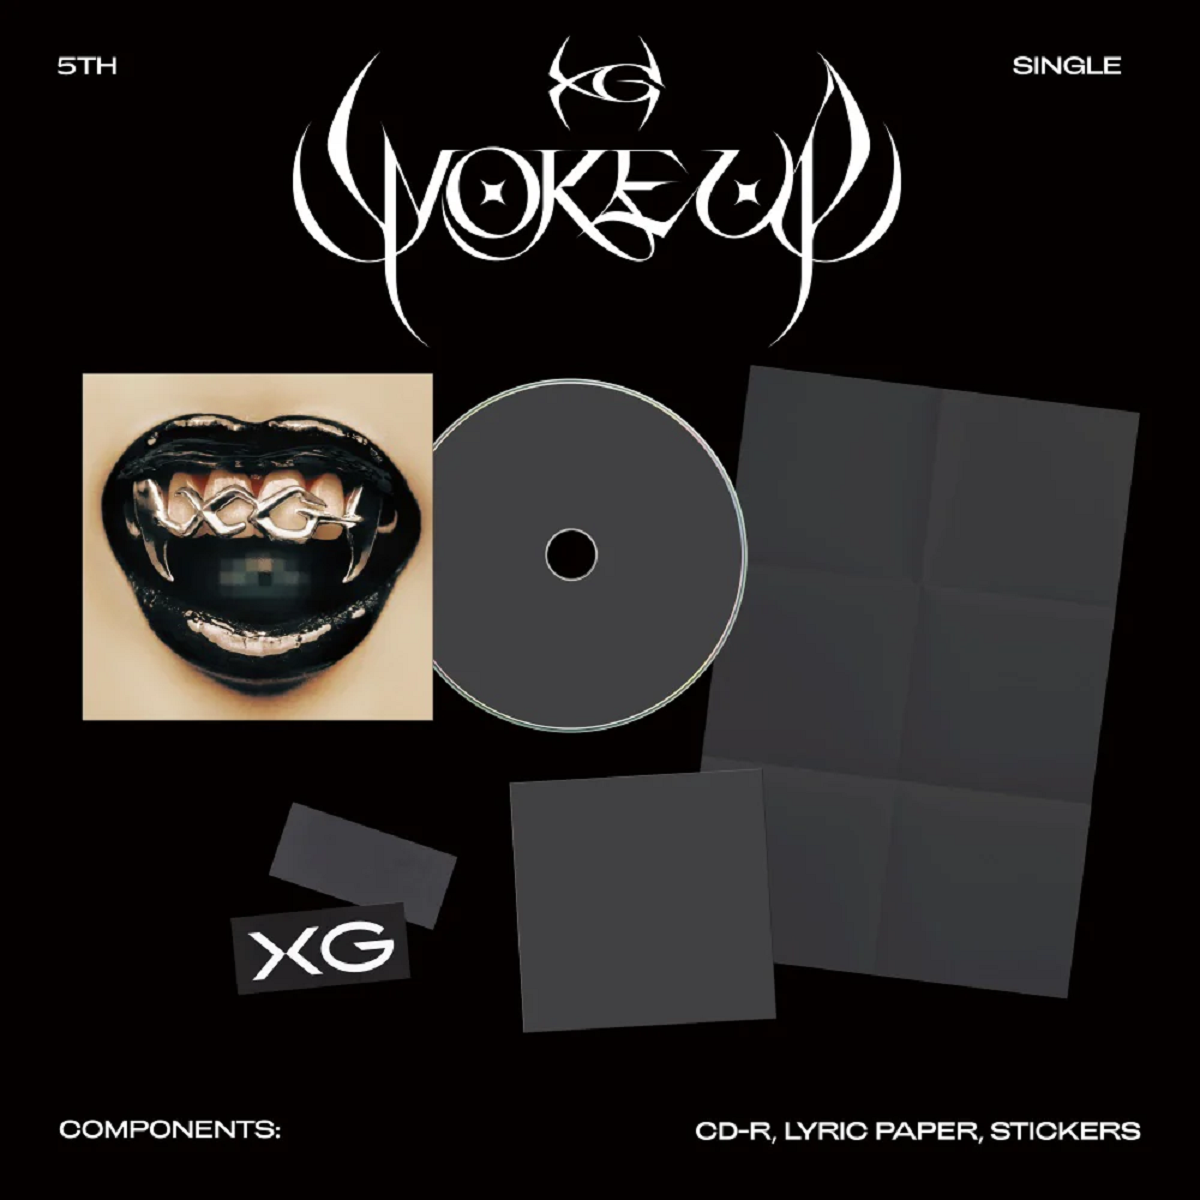 A woman's mouth with a chain around it, symbolizing silence and oppression. the album contents are shown against a black background